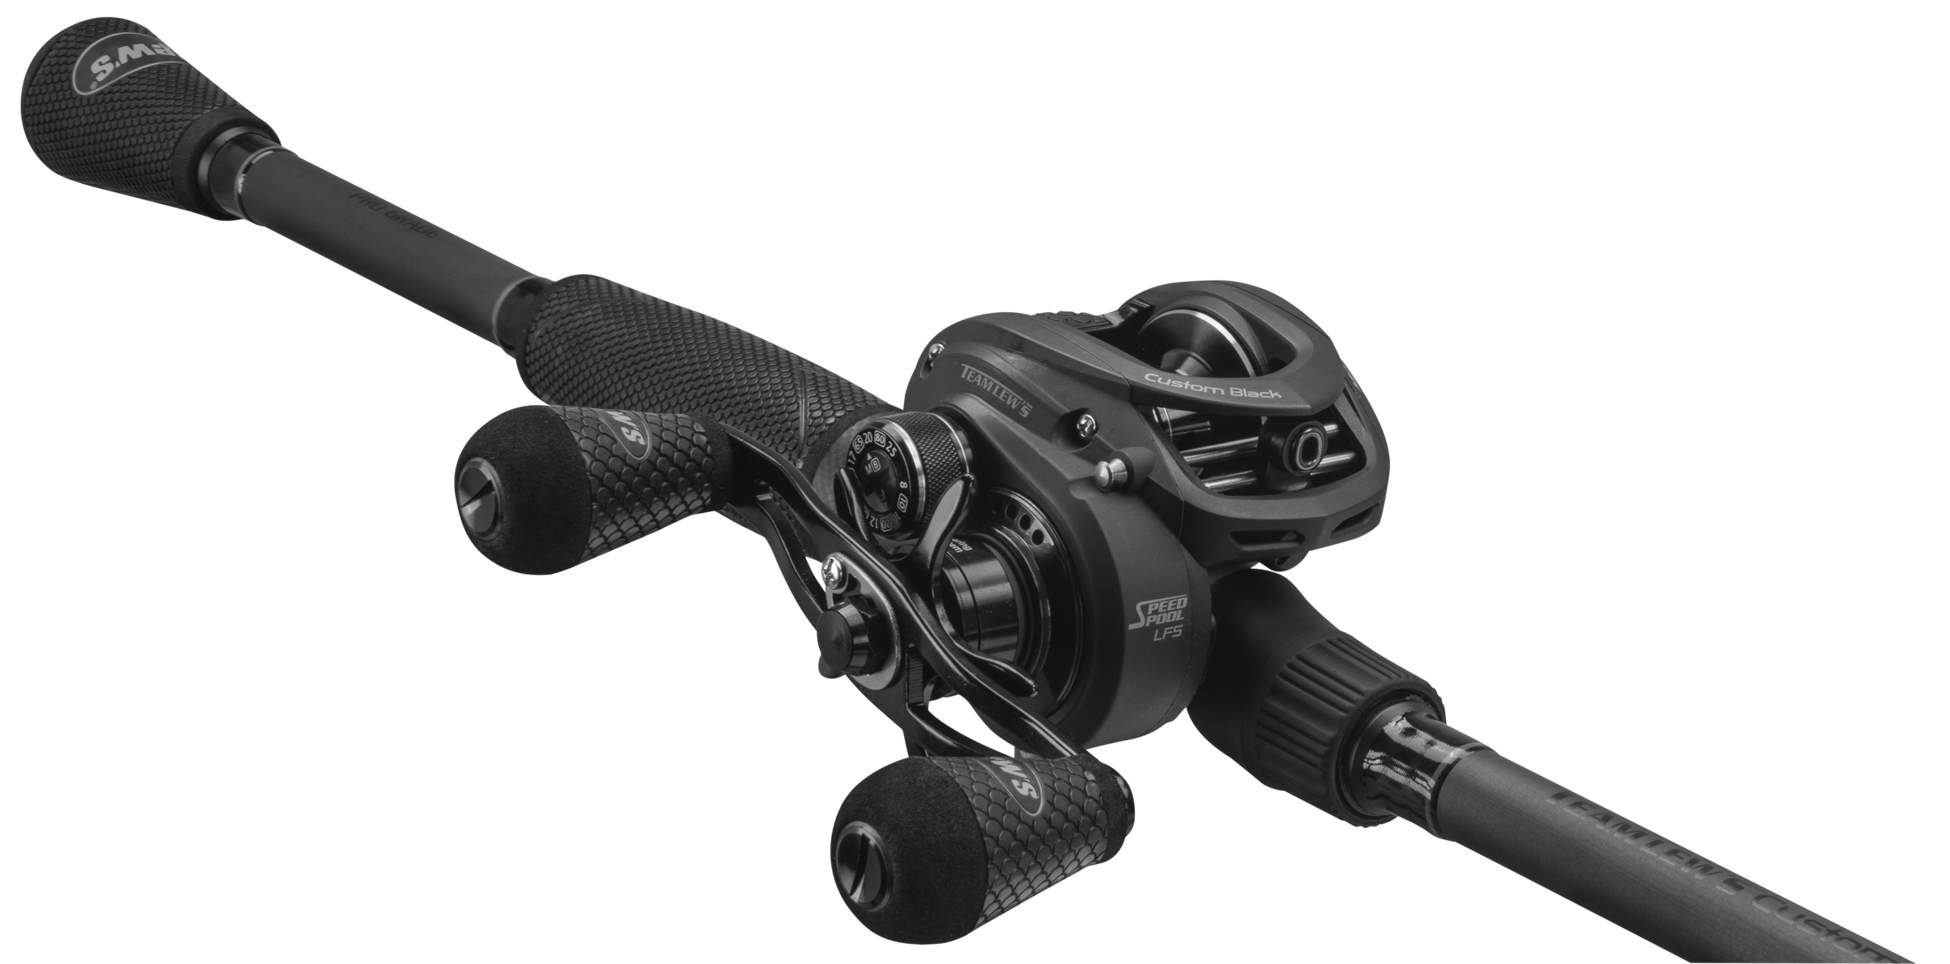 Lew's Mach Crush SLP Casting Reel Review - Wired2Fish